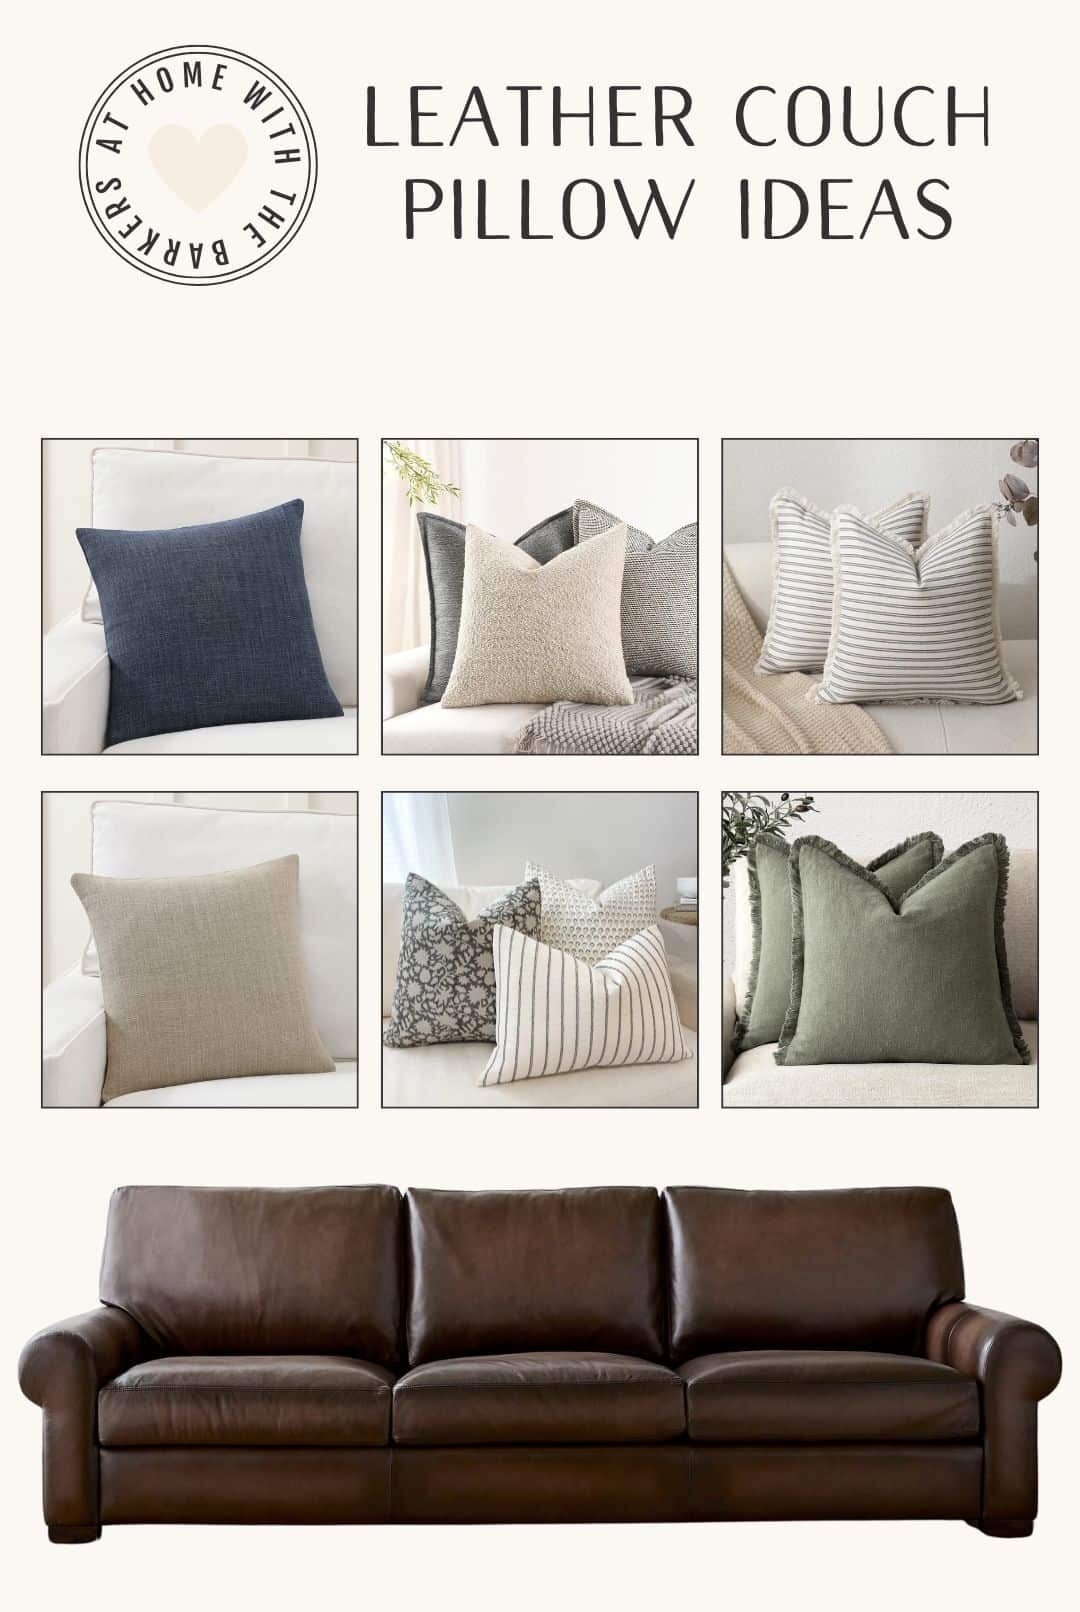 Dark Leather couch pillow ideas